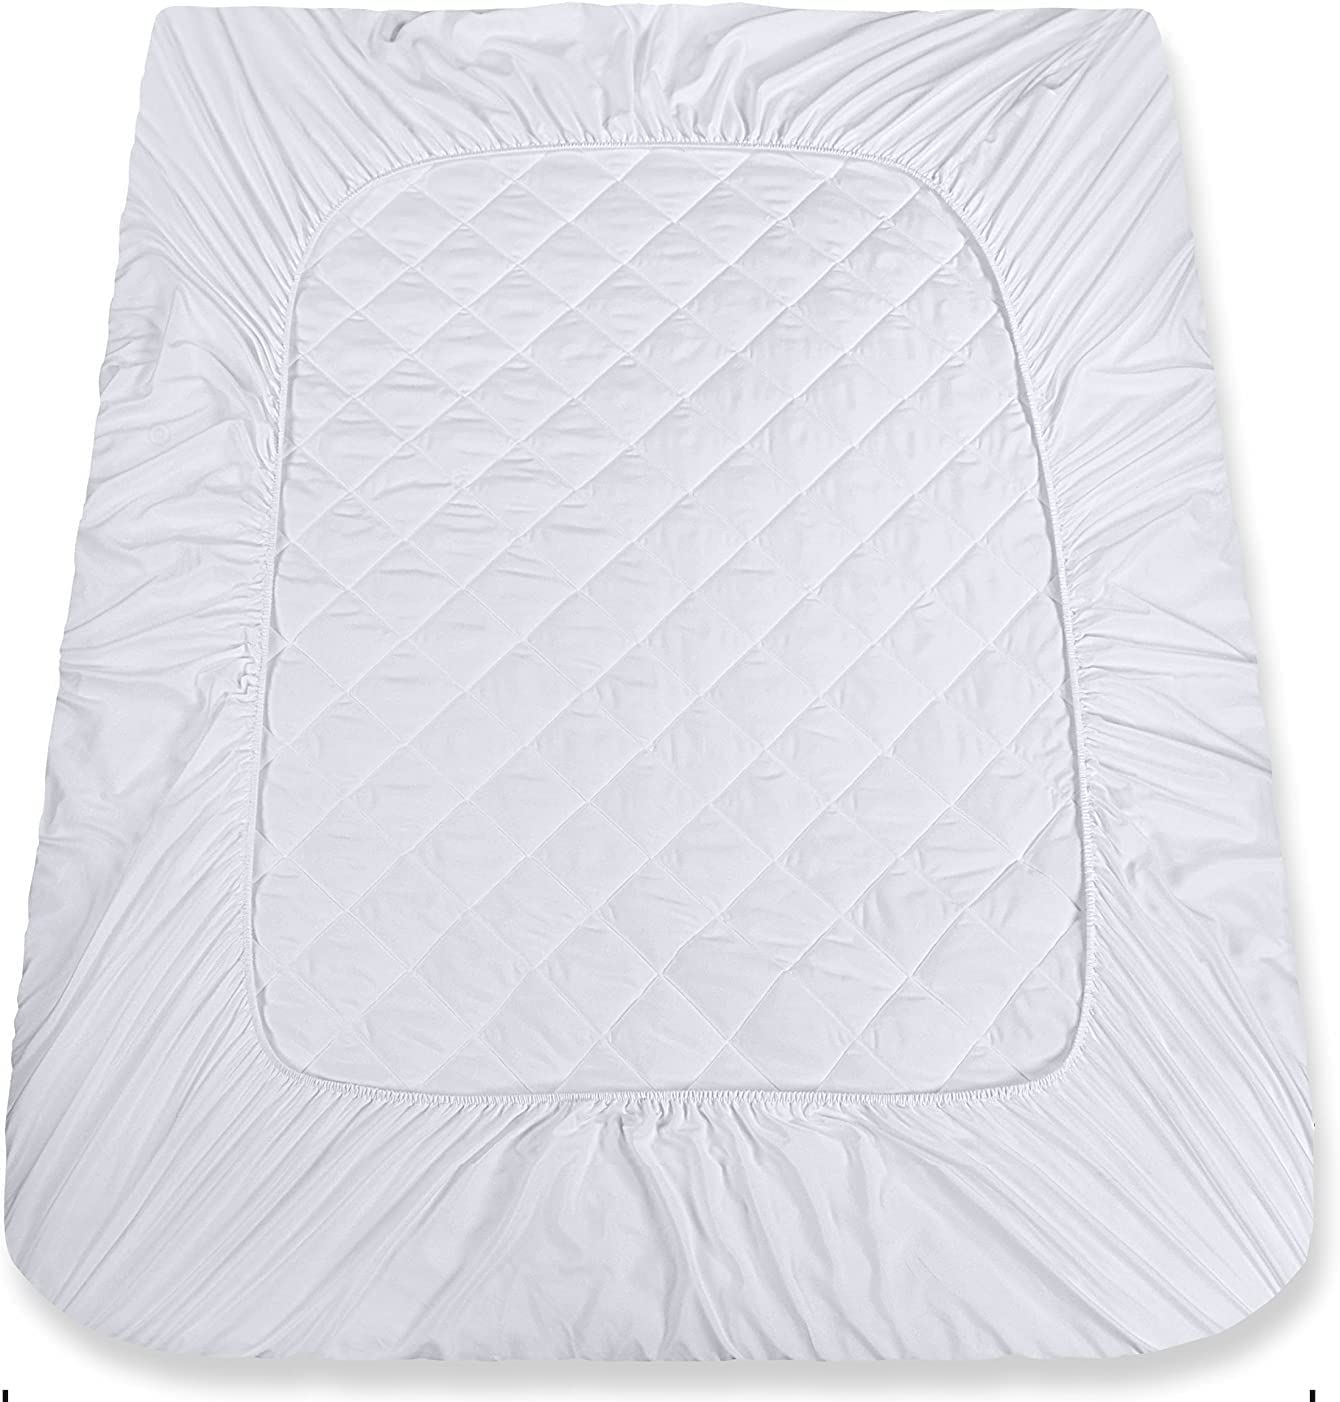 Cot Size Mattress Pad Waterproof Quilted,Cotton Top Soft Mattress Pads Protector Cover Quilted Fitted Mattress ProtectorFits Narrow Twin / Camp Bunk / Rvs Bunk / Guest Beds